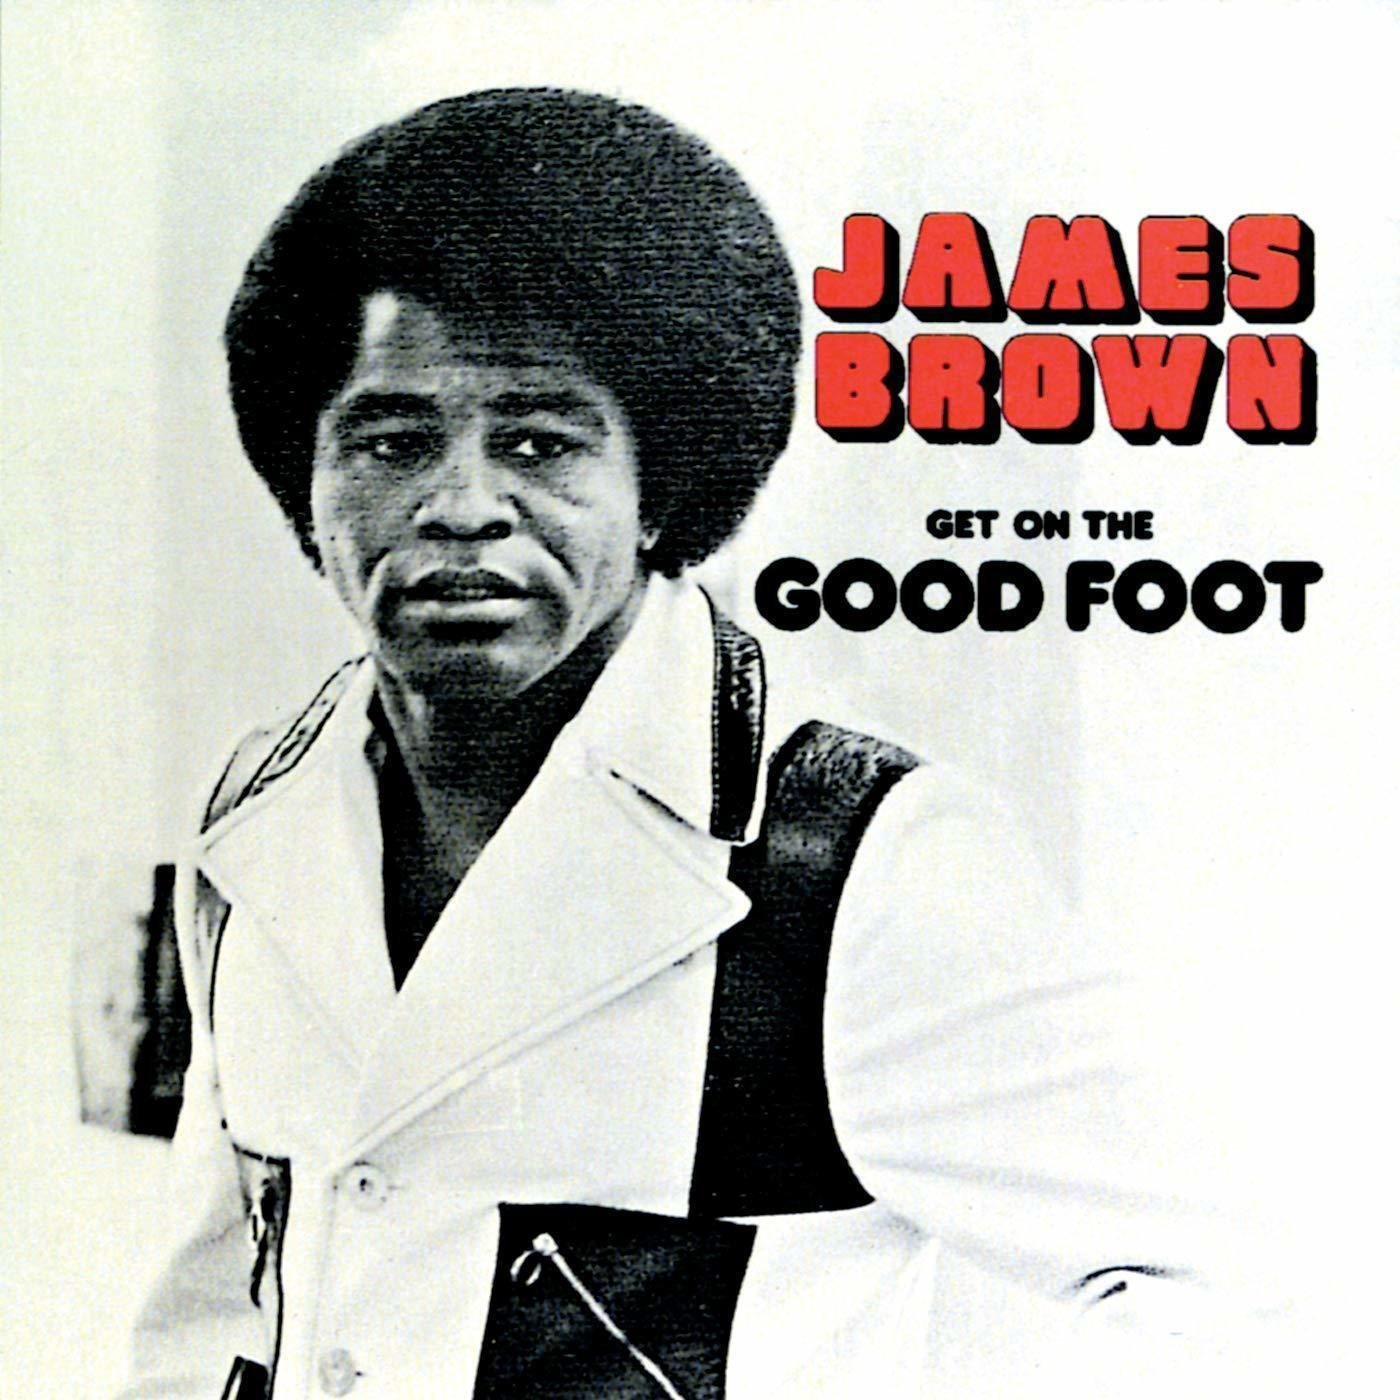 Vinyl Record James Brown - Get On The Good Foot (2 LP)